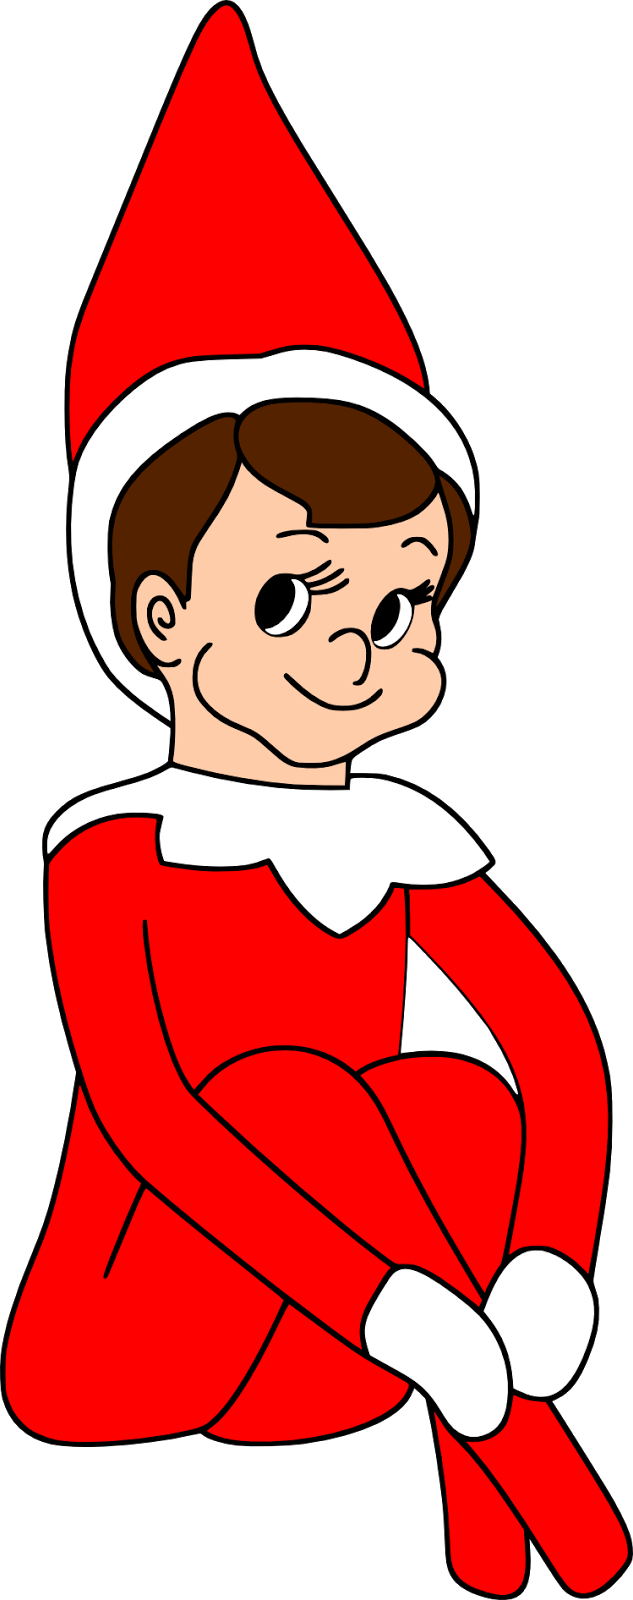 Elf On The Shelf Clipart - Elf On The Shelf, Transparent background PNG HD thumbnail